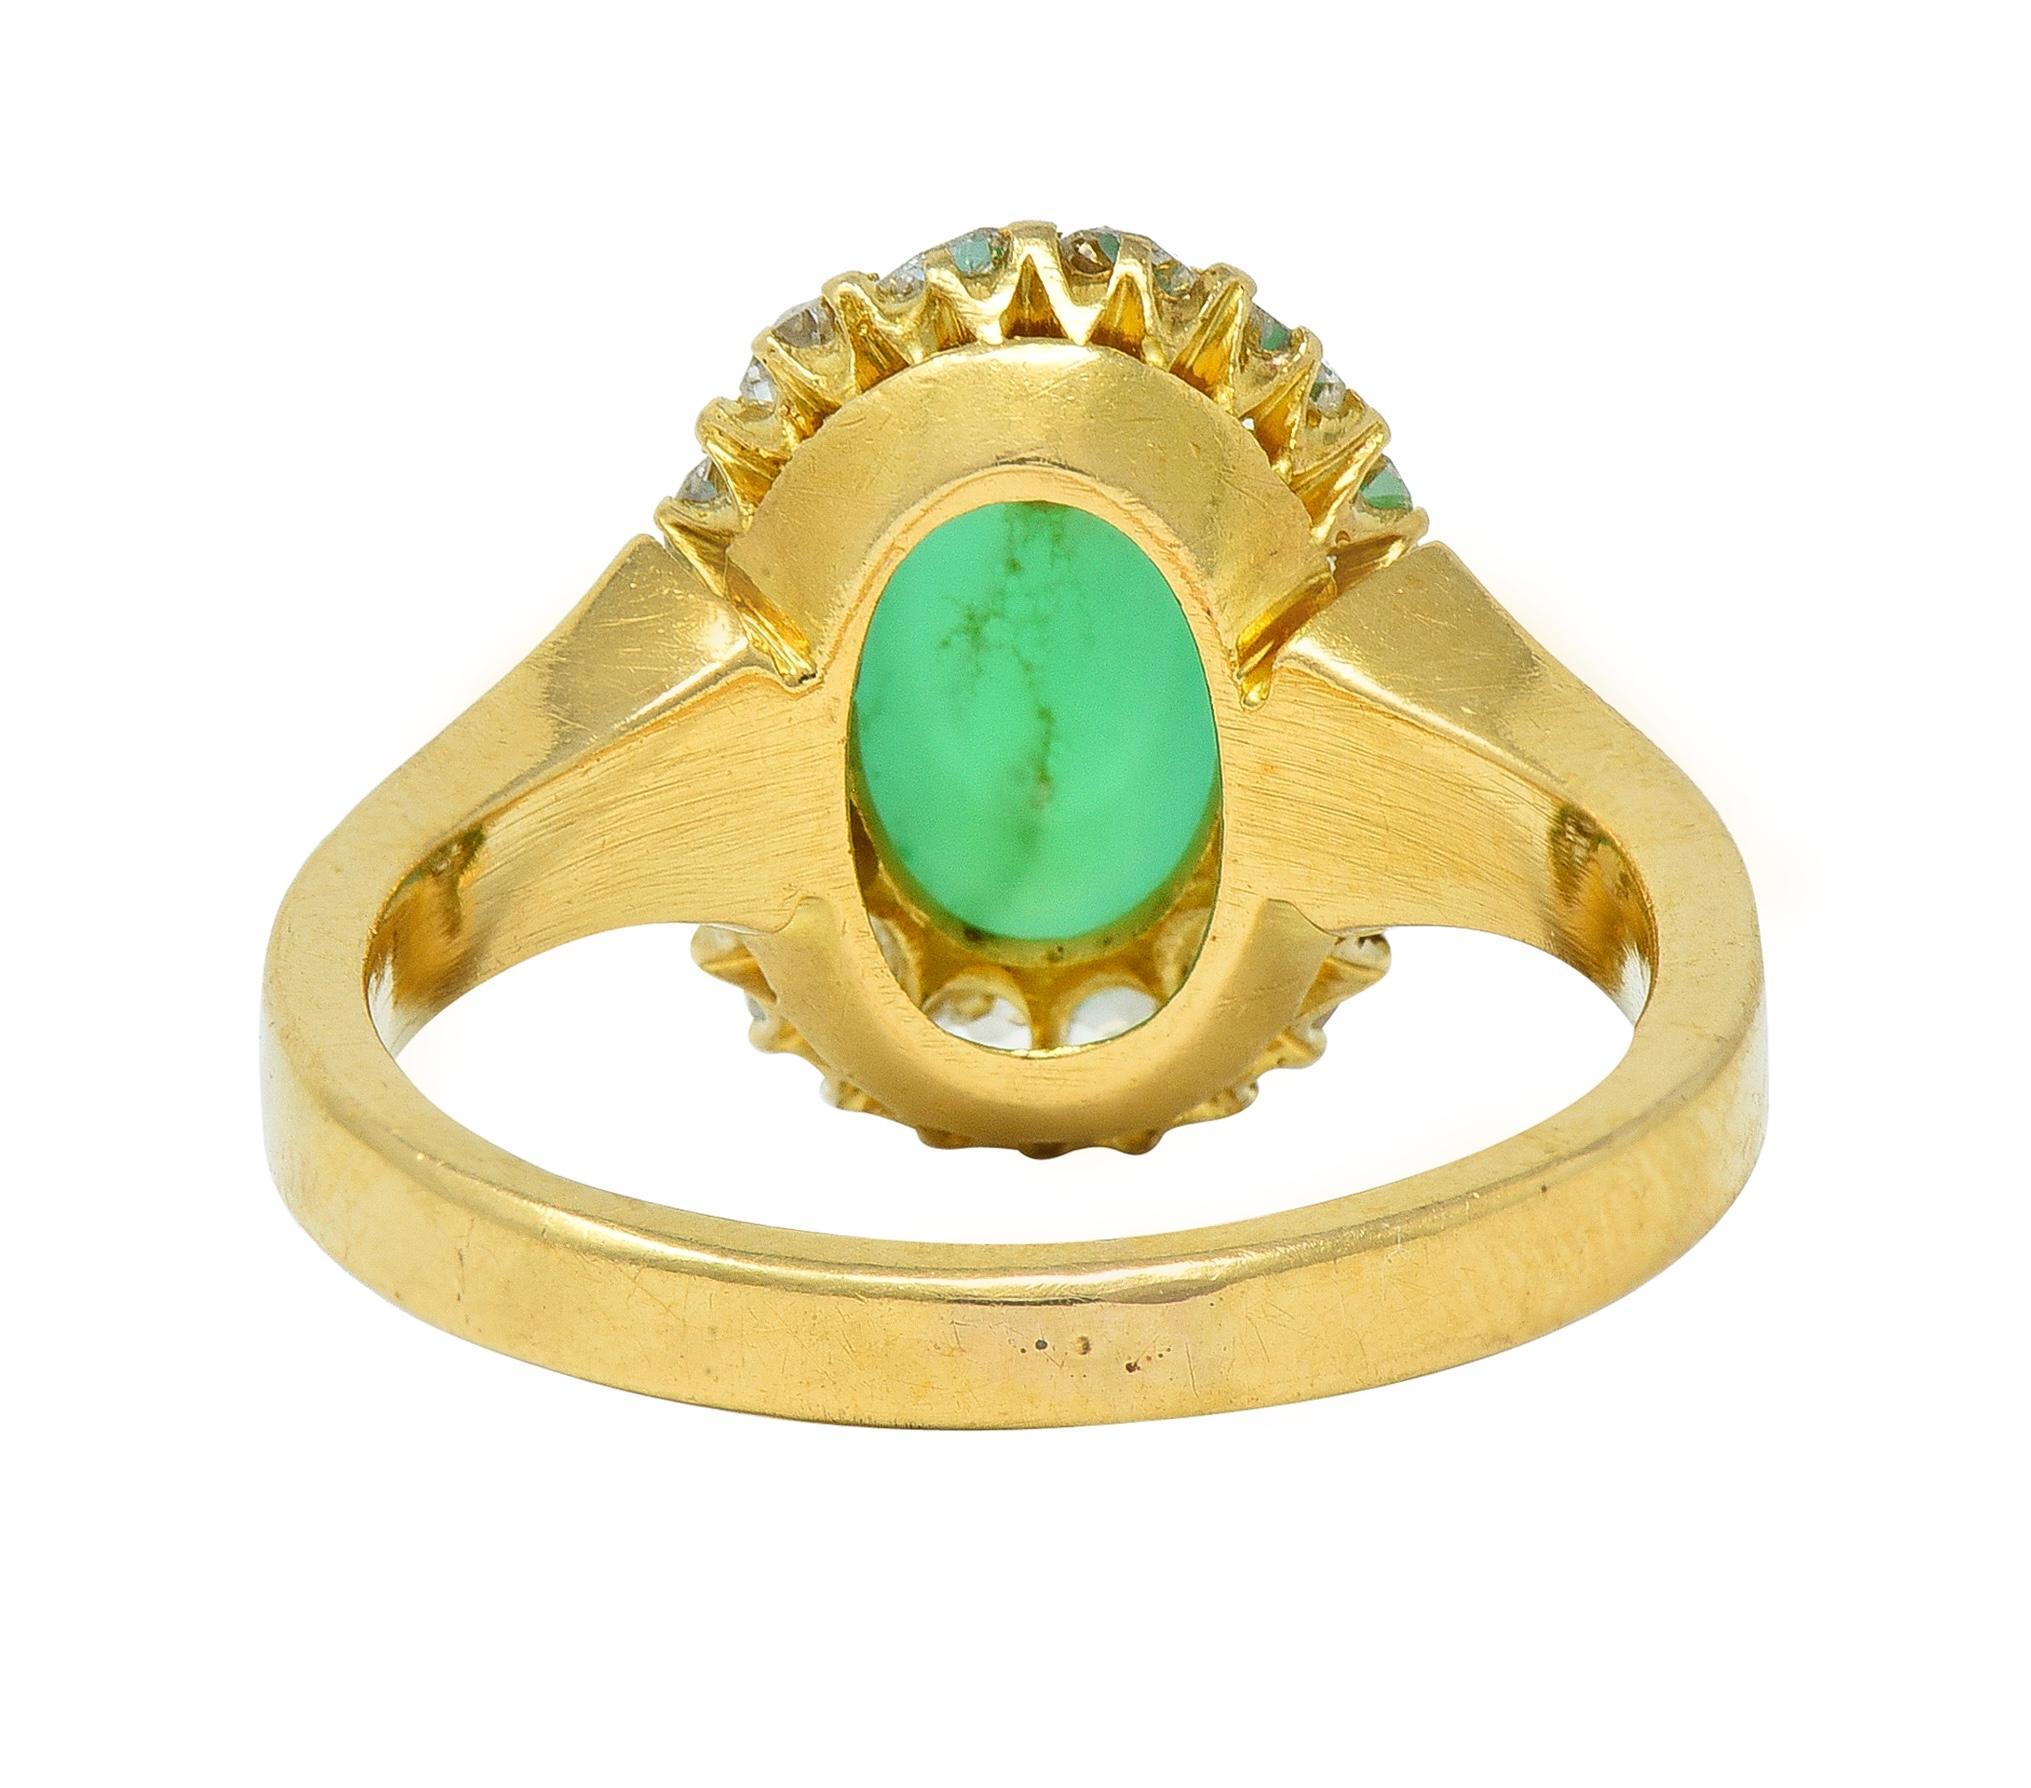 Modernist Chrysoprase Diamond 18 Karat Yellow Gold Vintage Halo Ring In Excellent Condition For Sale In Philadelphia, PA